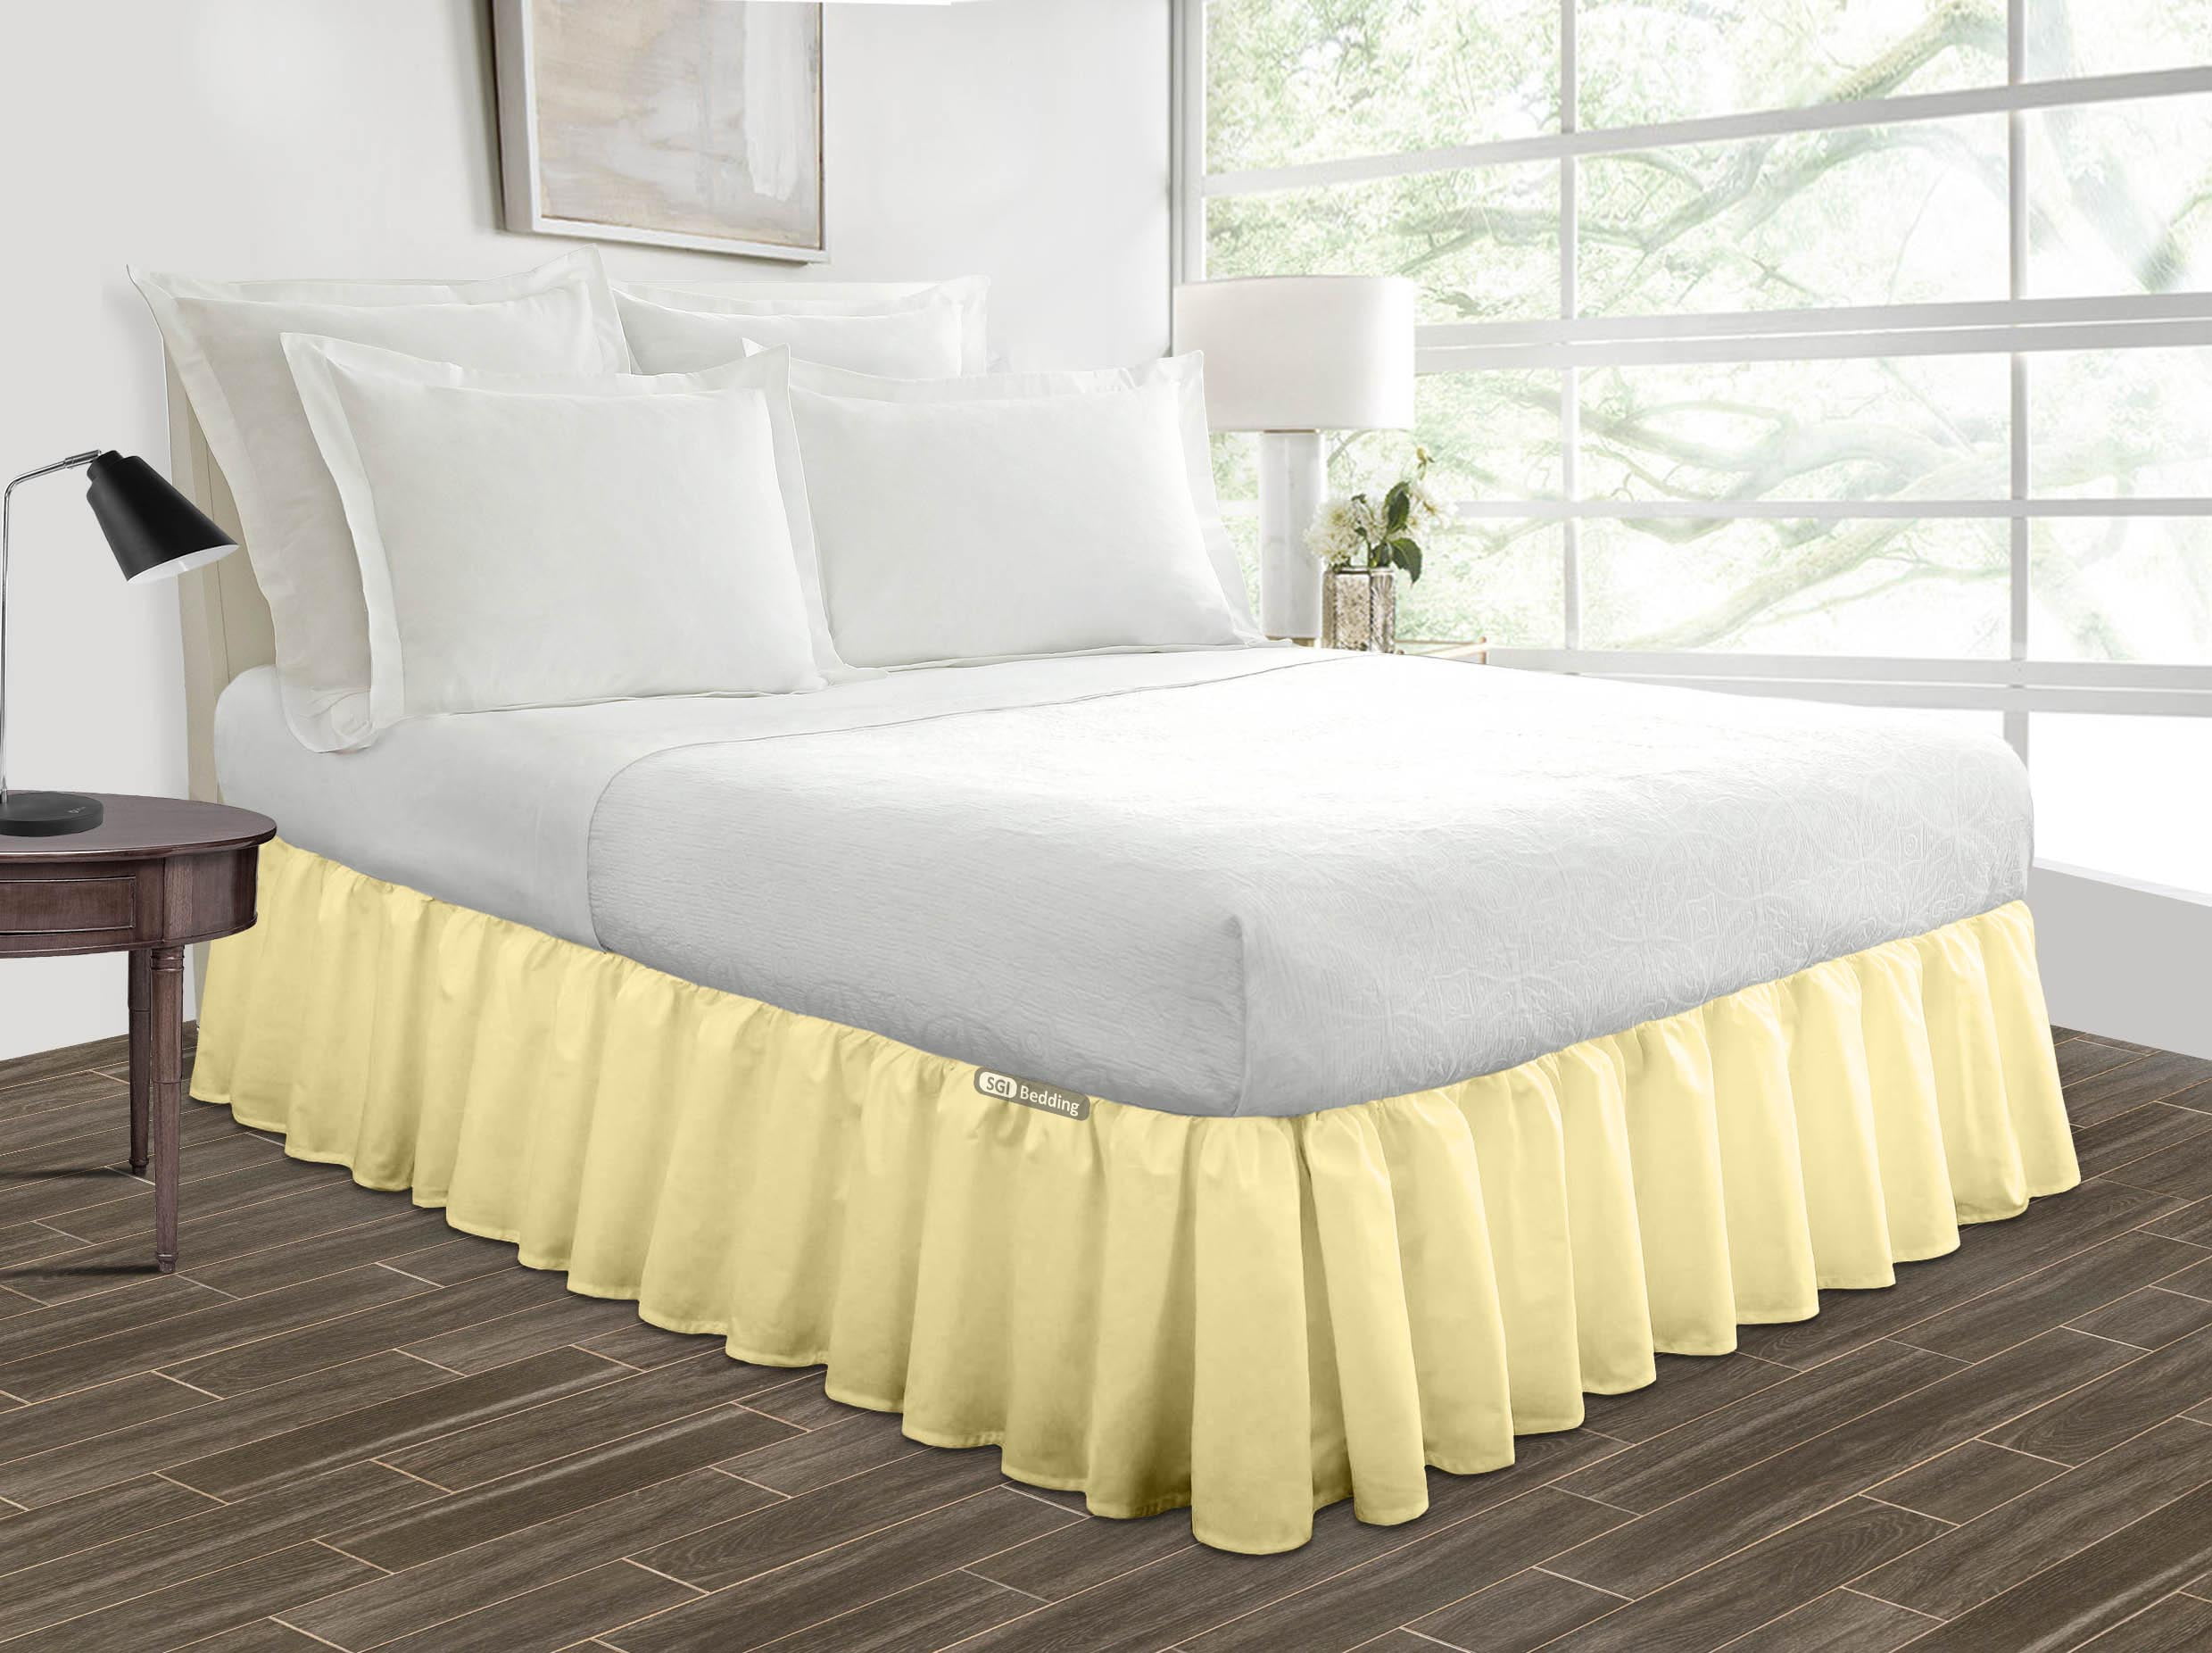 Moss Striped Bed Skirt Select Drop Length All US Size 1000 TC Egyptian Cotton 